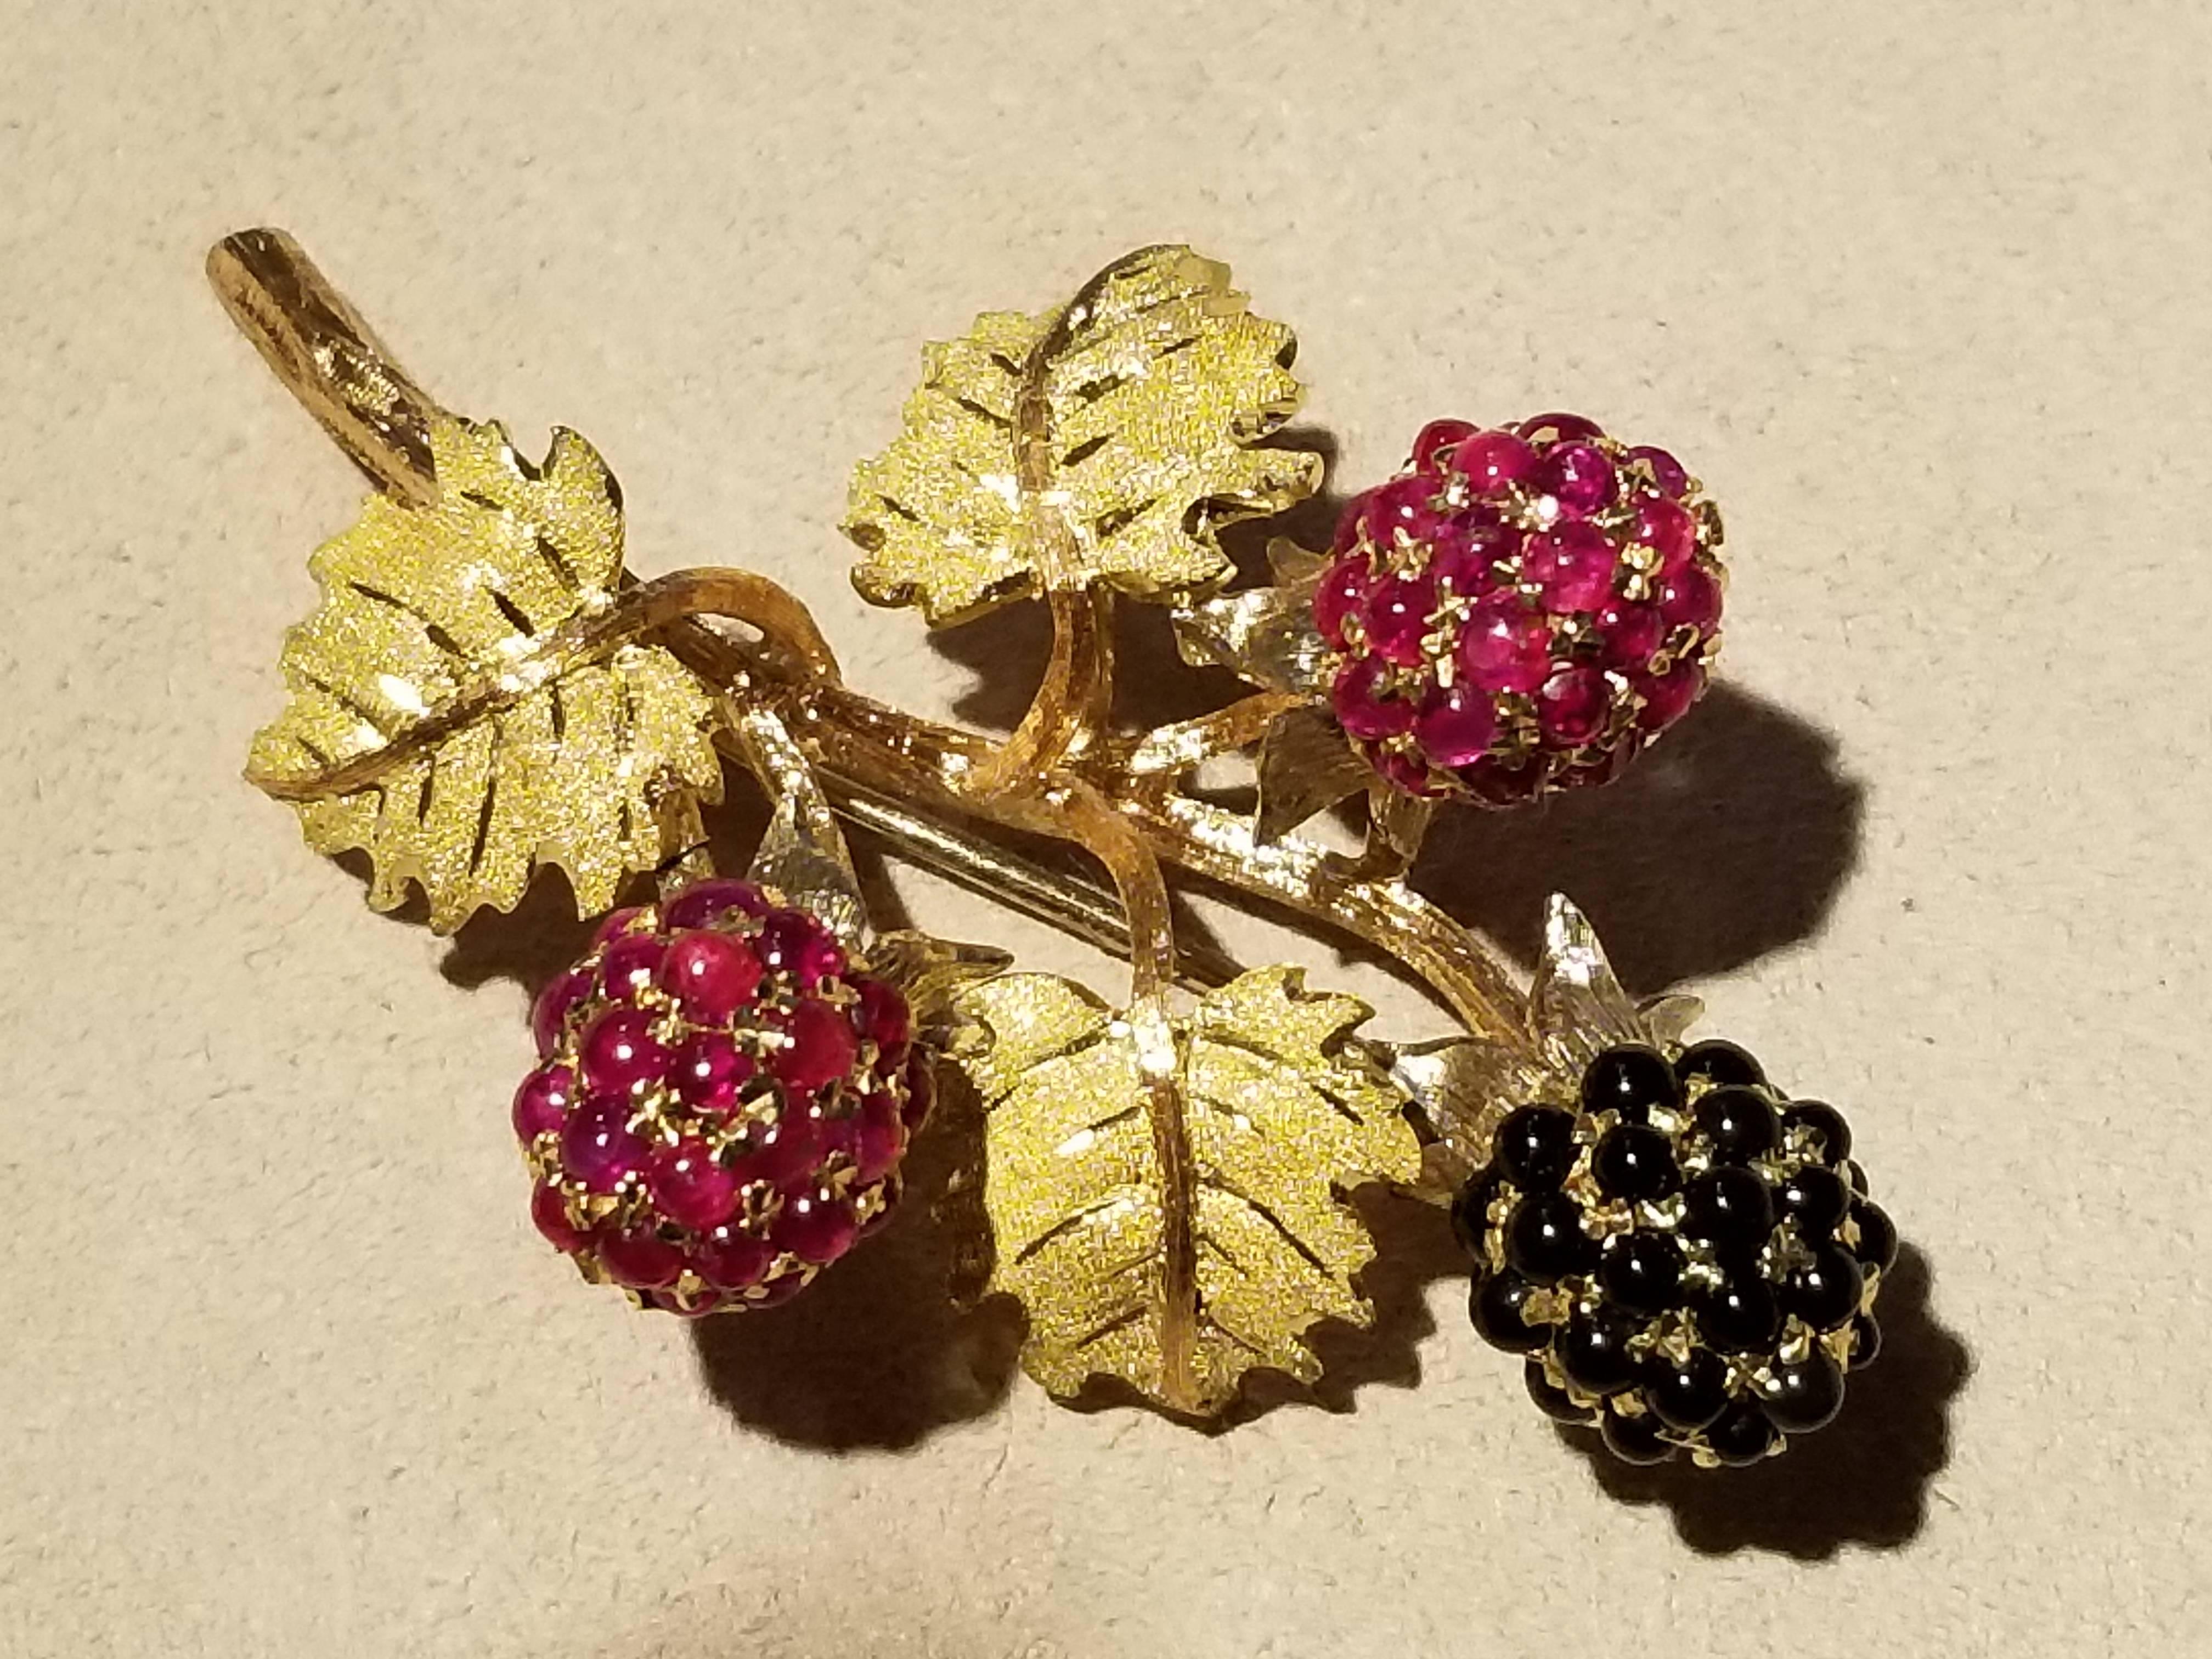 18 Karat Gold Buccellati Ruby and Onyx Berry Brooch In Excellent Condition For Sale In Santa Fe, NM